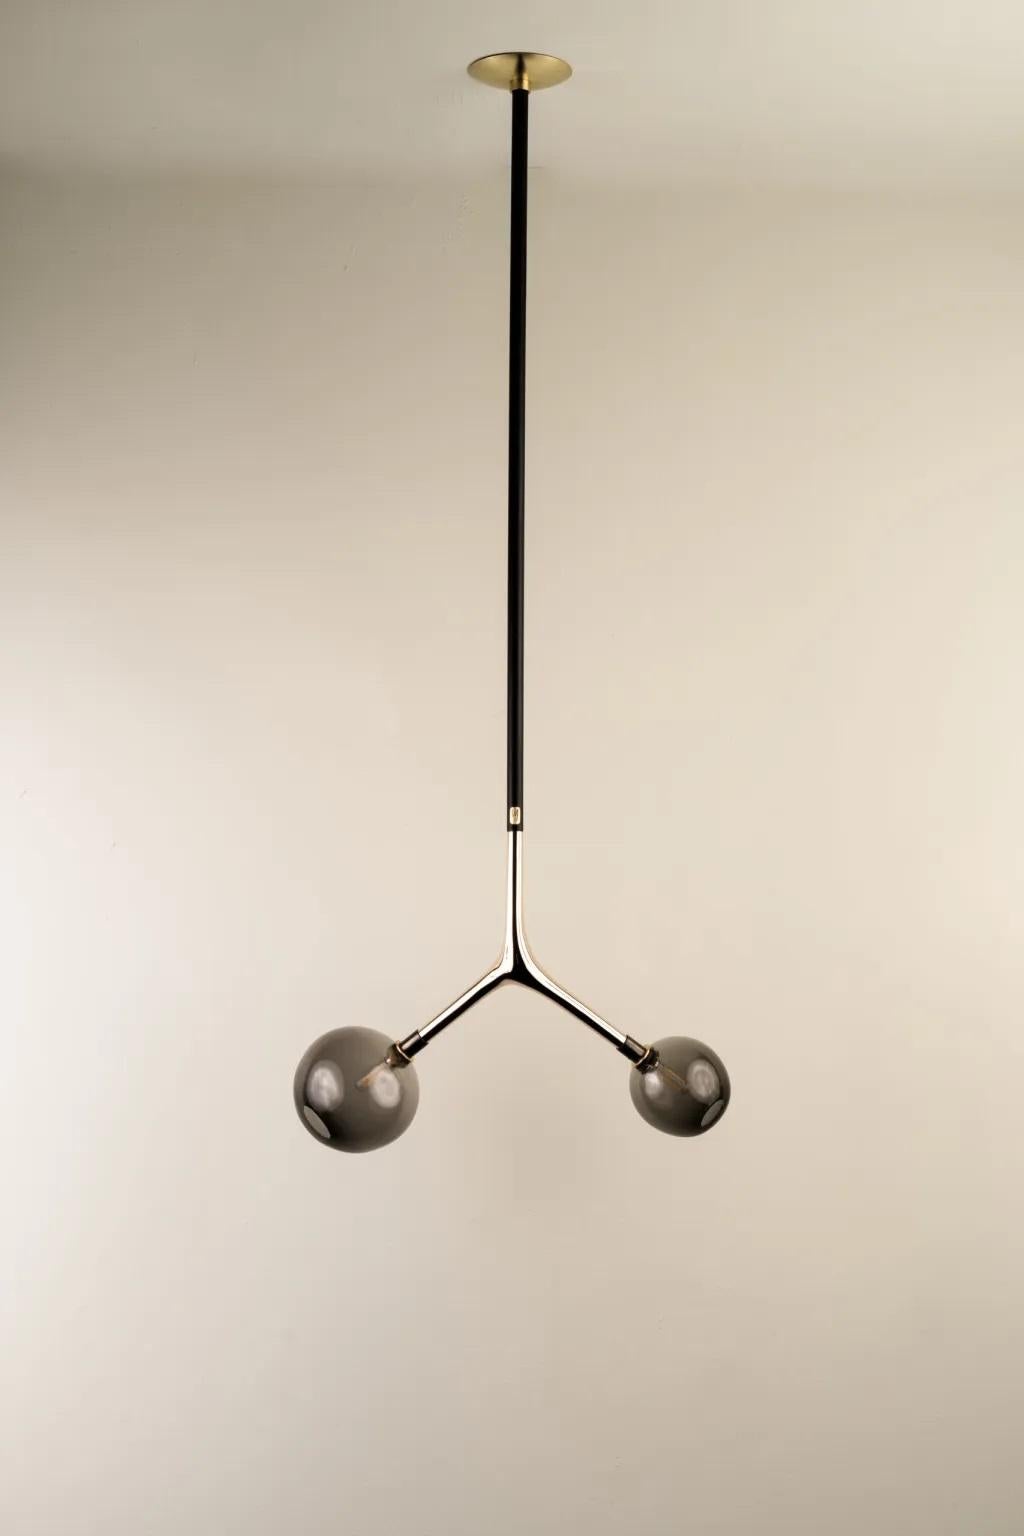 Smoke Dupla Pendant Lamp by Isabel Moncada
Dimensions: W 45 x D 20 x H 125 cm.
Materials: Brass, cast bronze and blown glass.

Dupla hangs from the ceiling just like a branch with its fruits. The customizable length options allow play with scale and